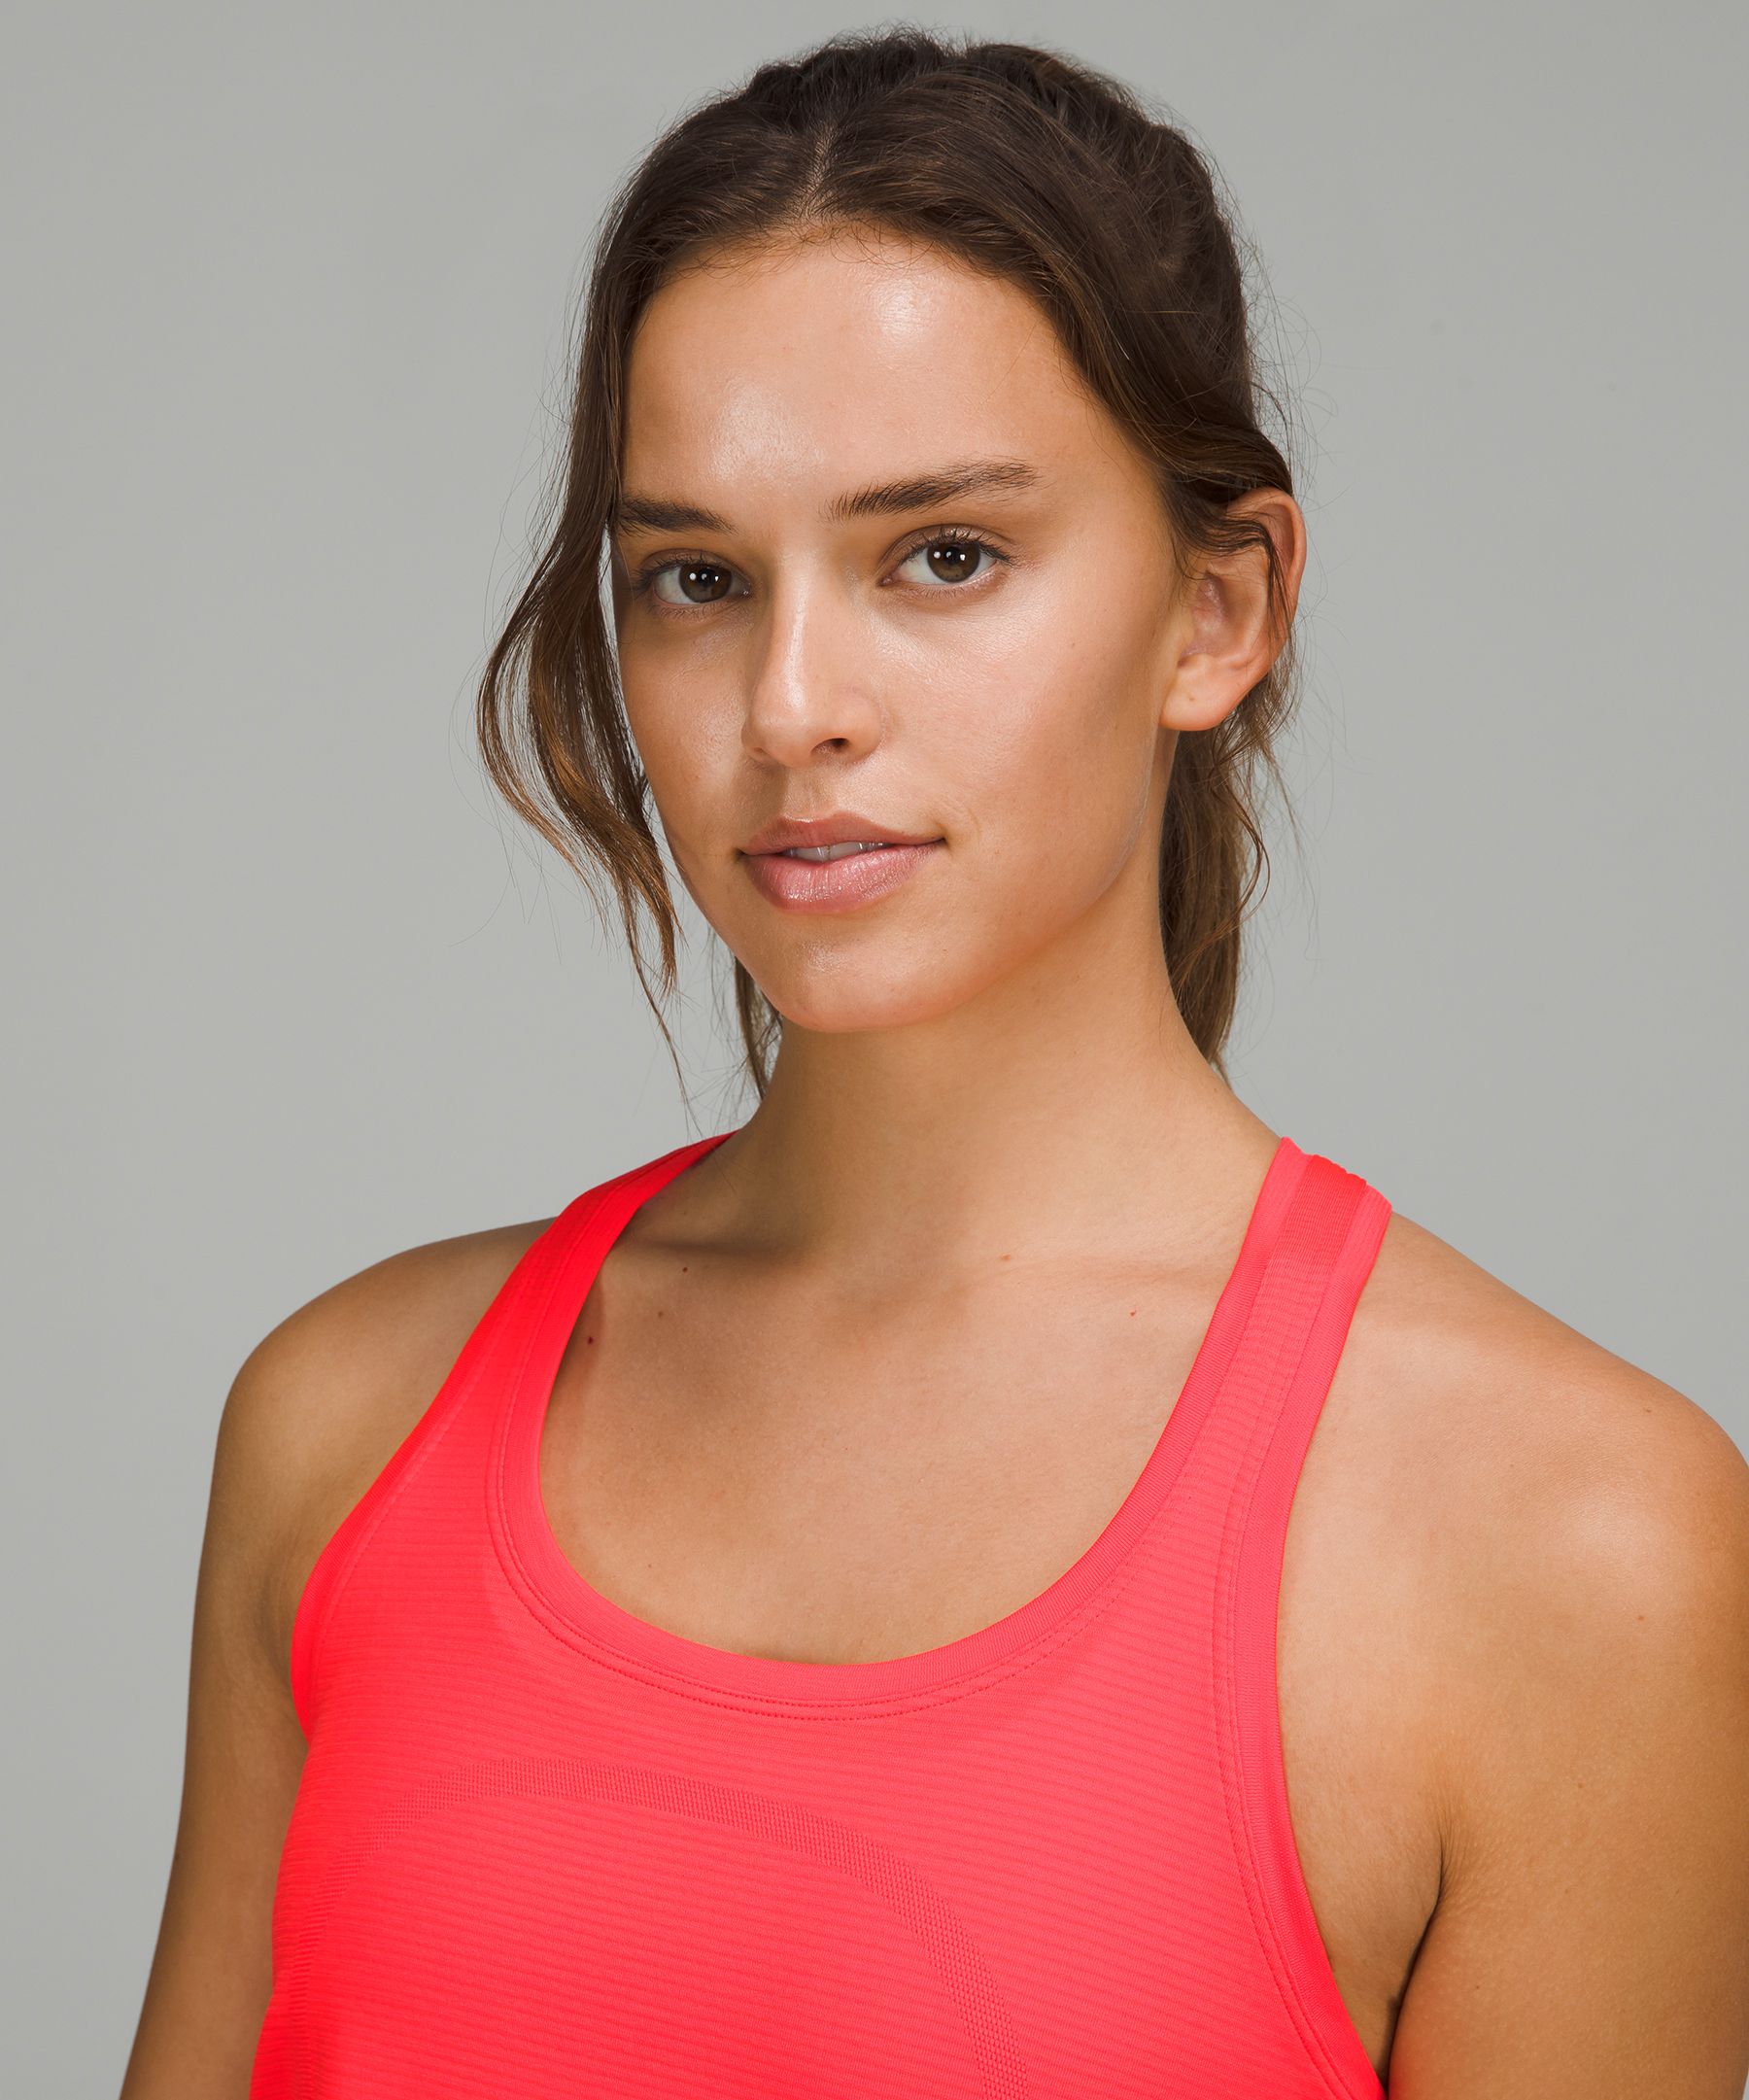 Lululemon baby pink racer back tank size 4 small. New Without Tags